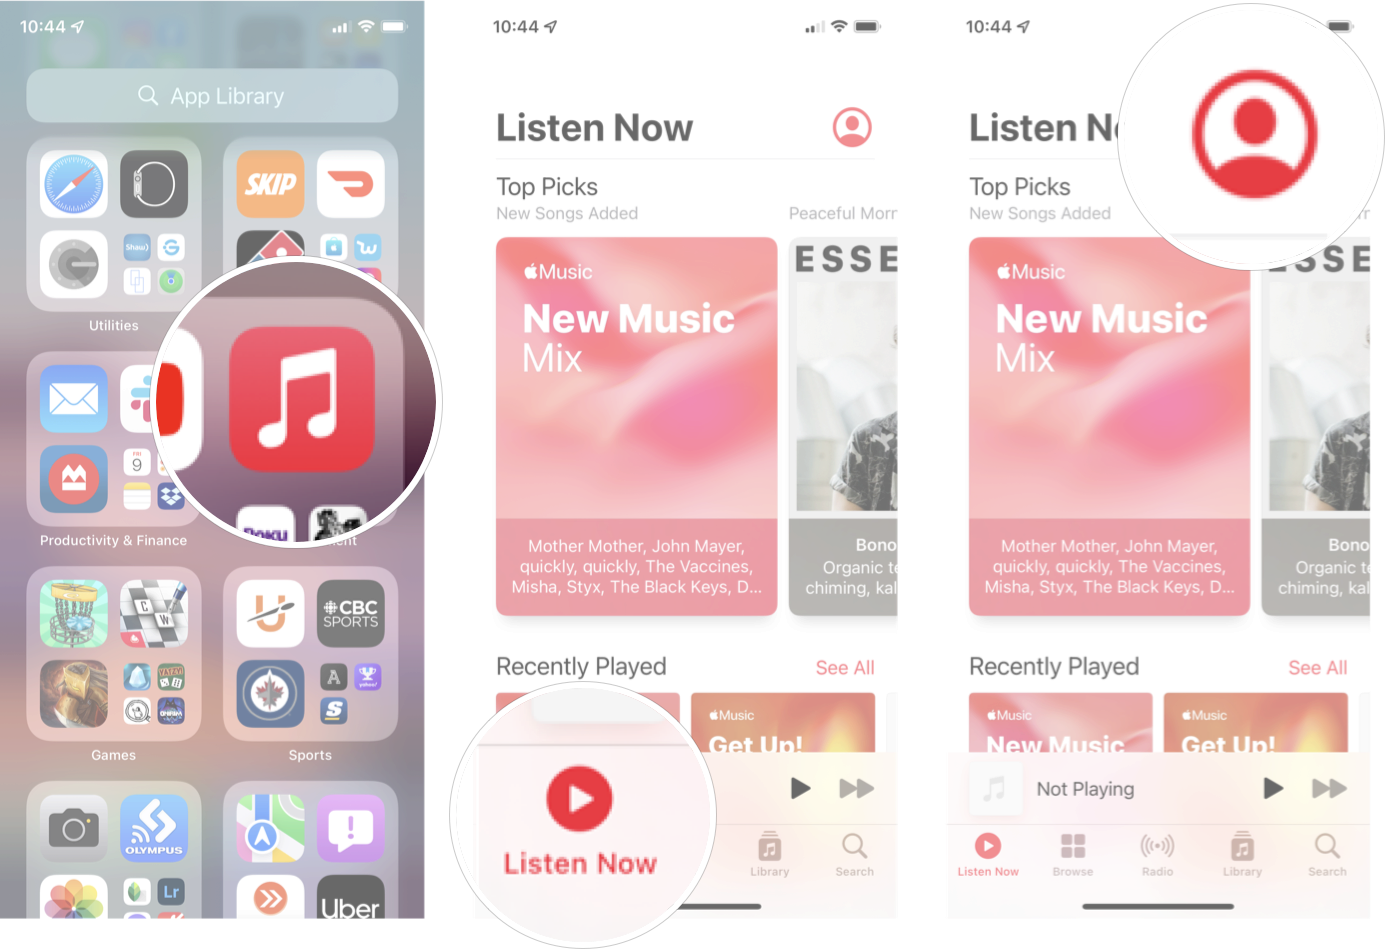 How To Switch Single To Family Plane Apple Music On iOS 14: Launch Music, tap Listen Now tab, and then tap the account icon.